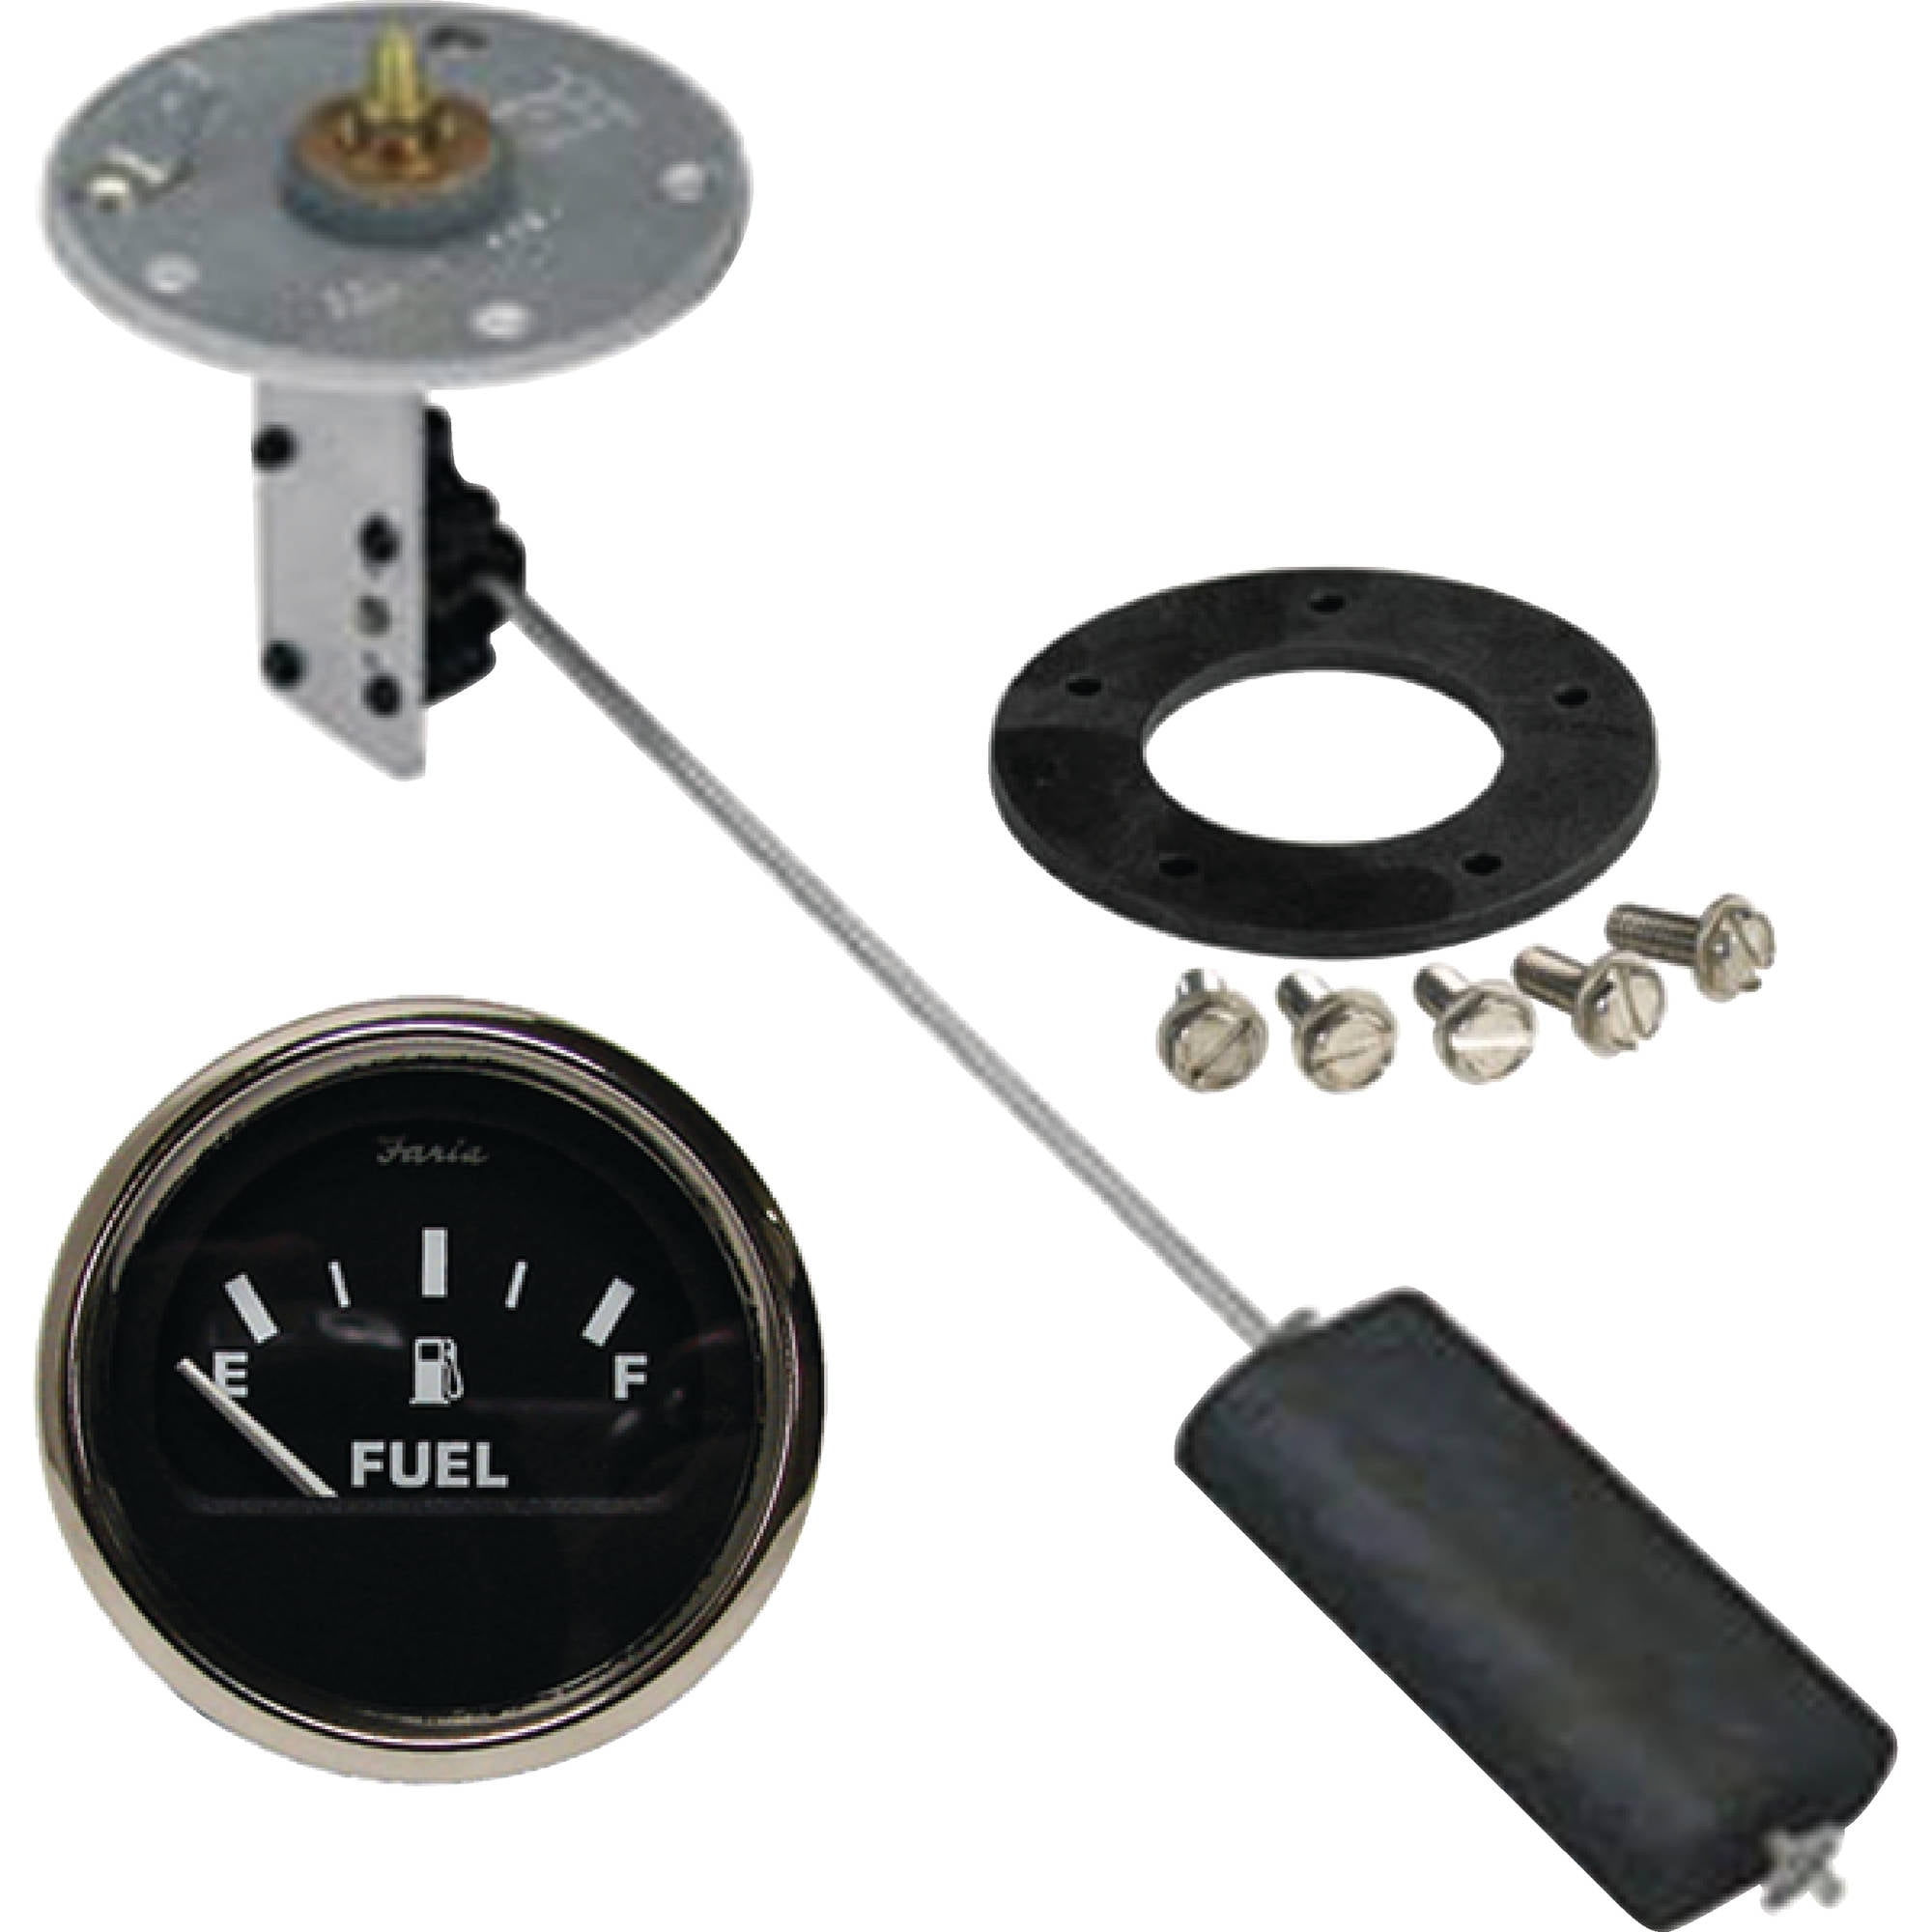 Marpac Boat Marine Elite Domed Glass Fuel Gauge With Stainless Steel Bezel 